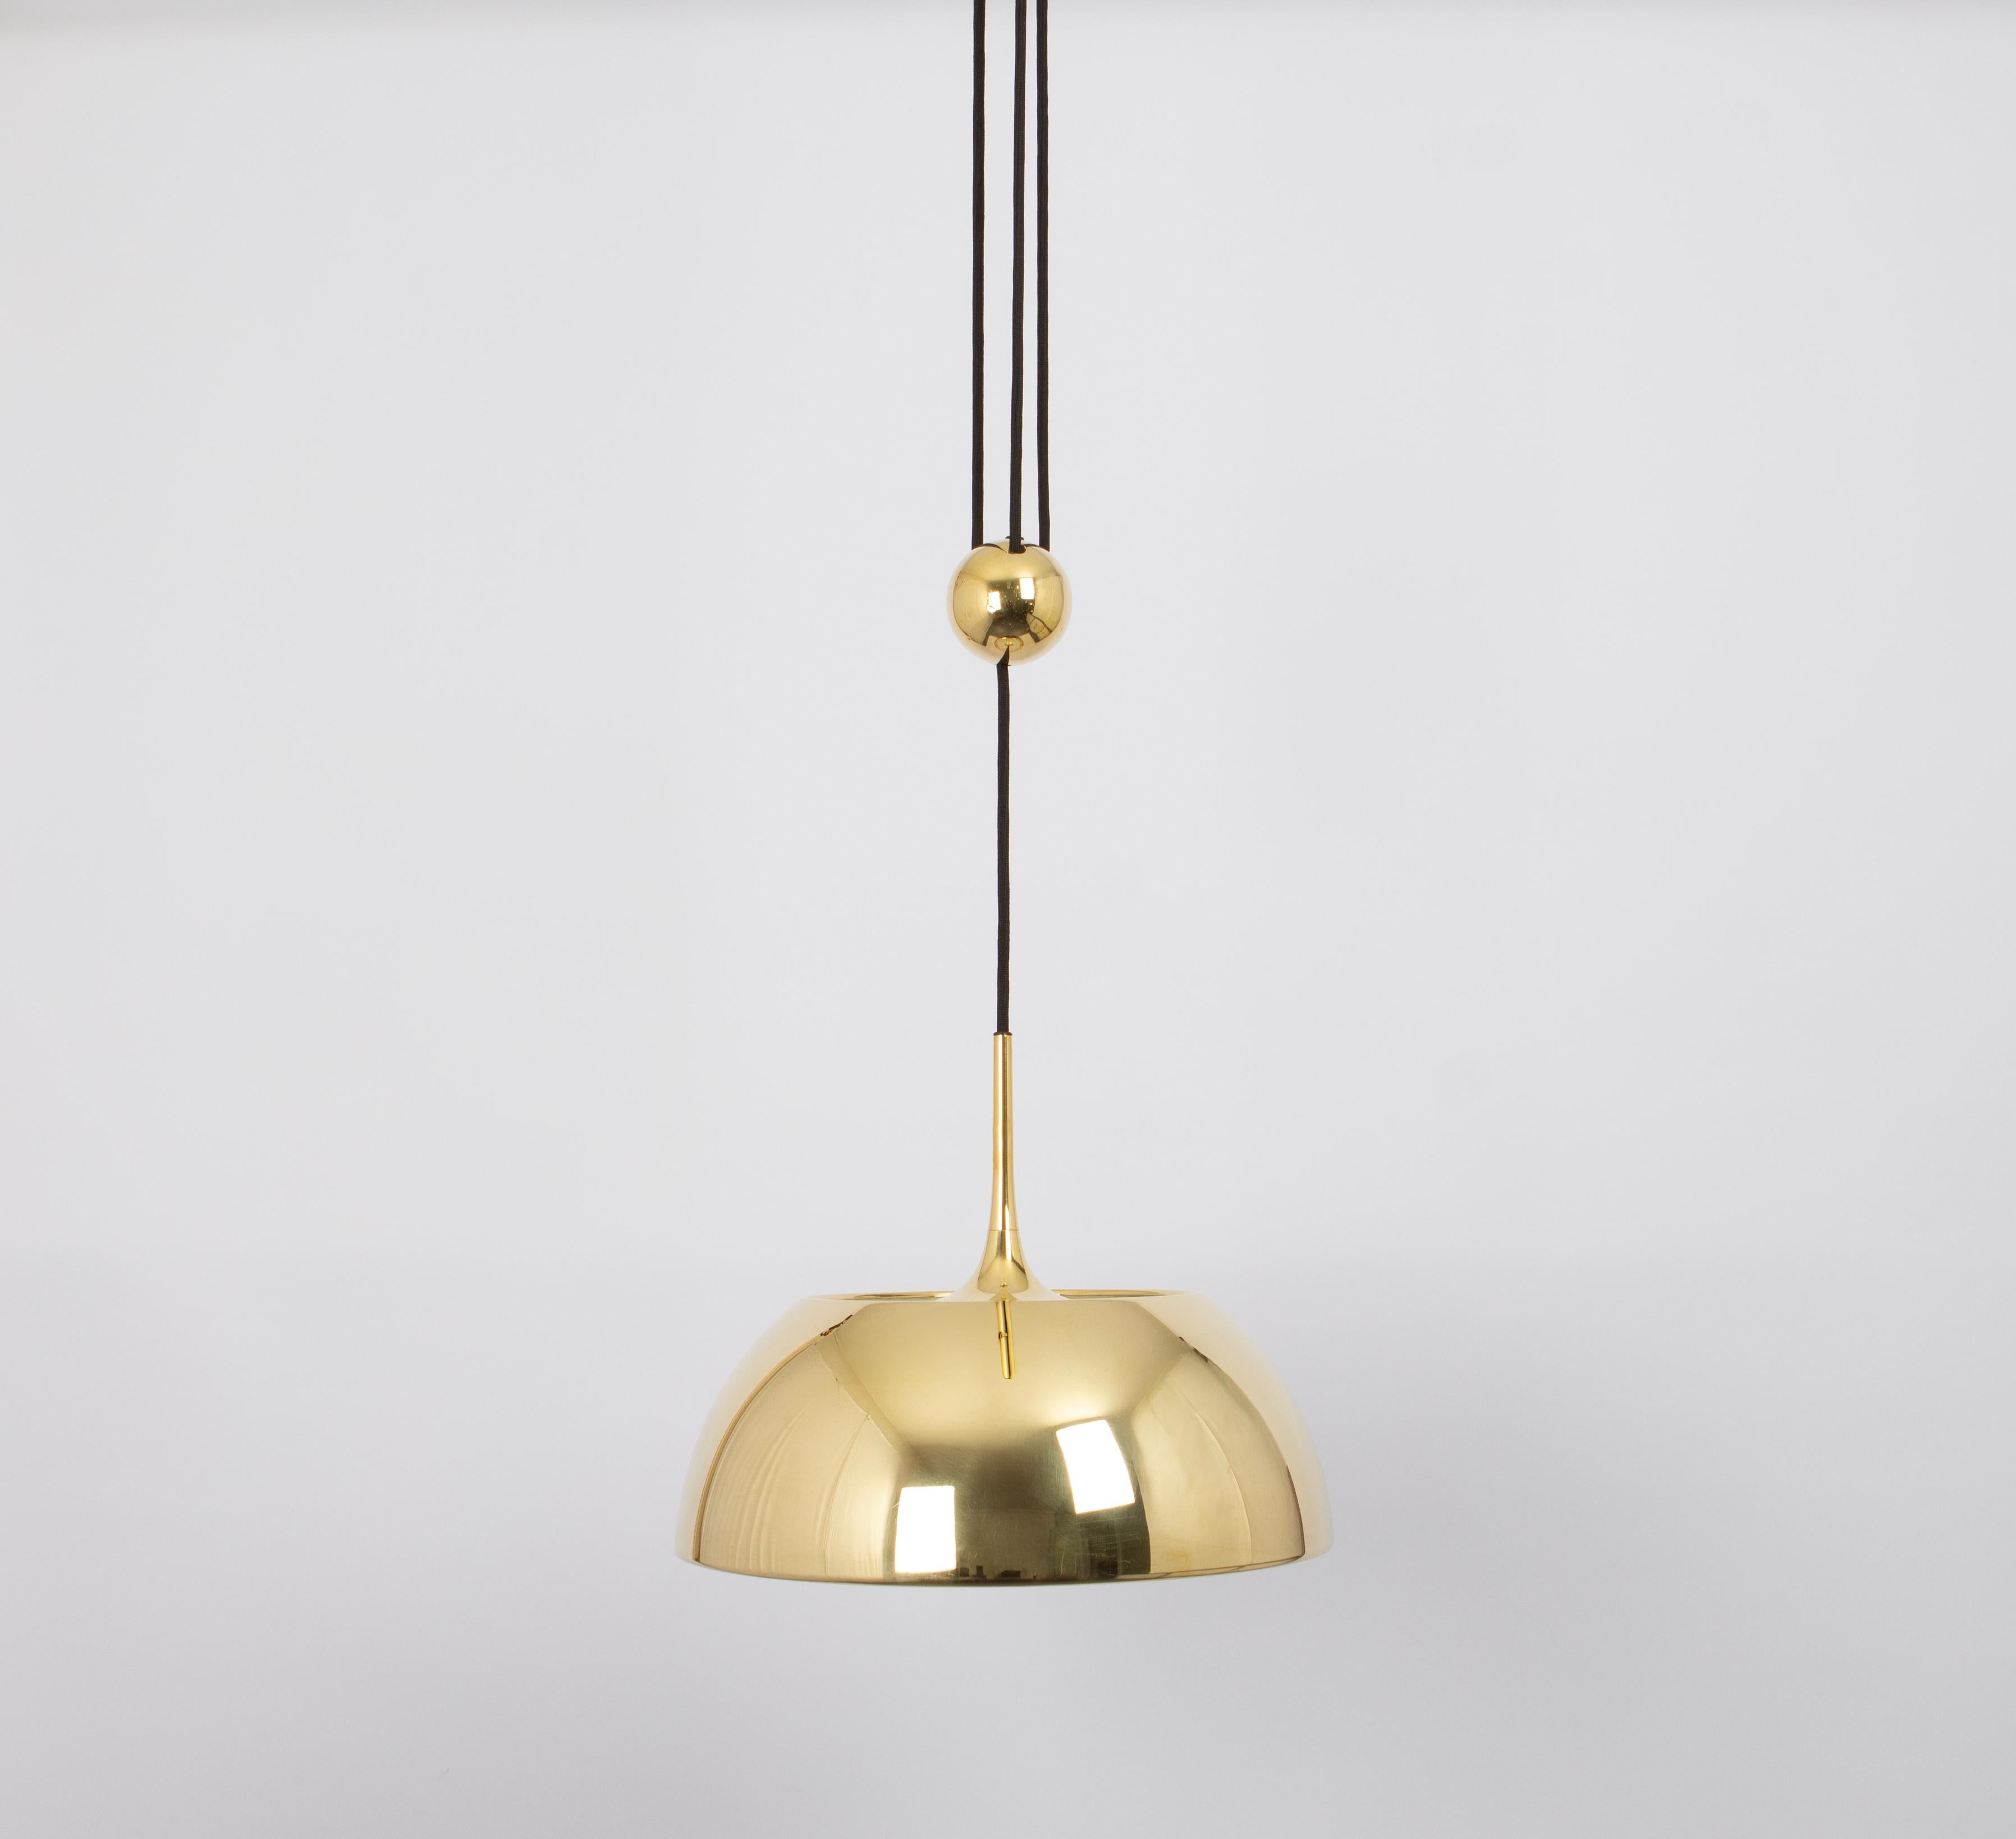 Large adjustable brass counterweight pendant light designed by Florian Schulz, Germany, 1970s.
It is a masterpiece of design and craftsmanship. It seamlessly blends functionality and aesthetics to create a lighting fixture that's as much an art